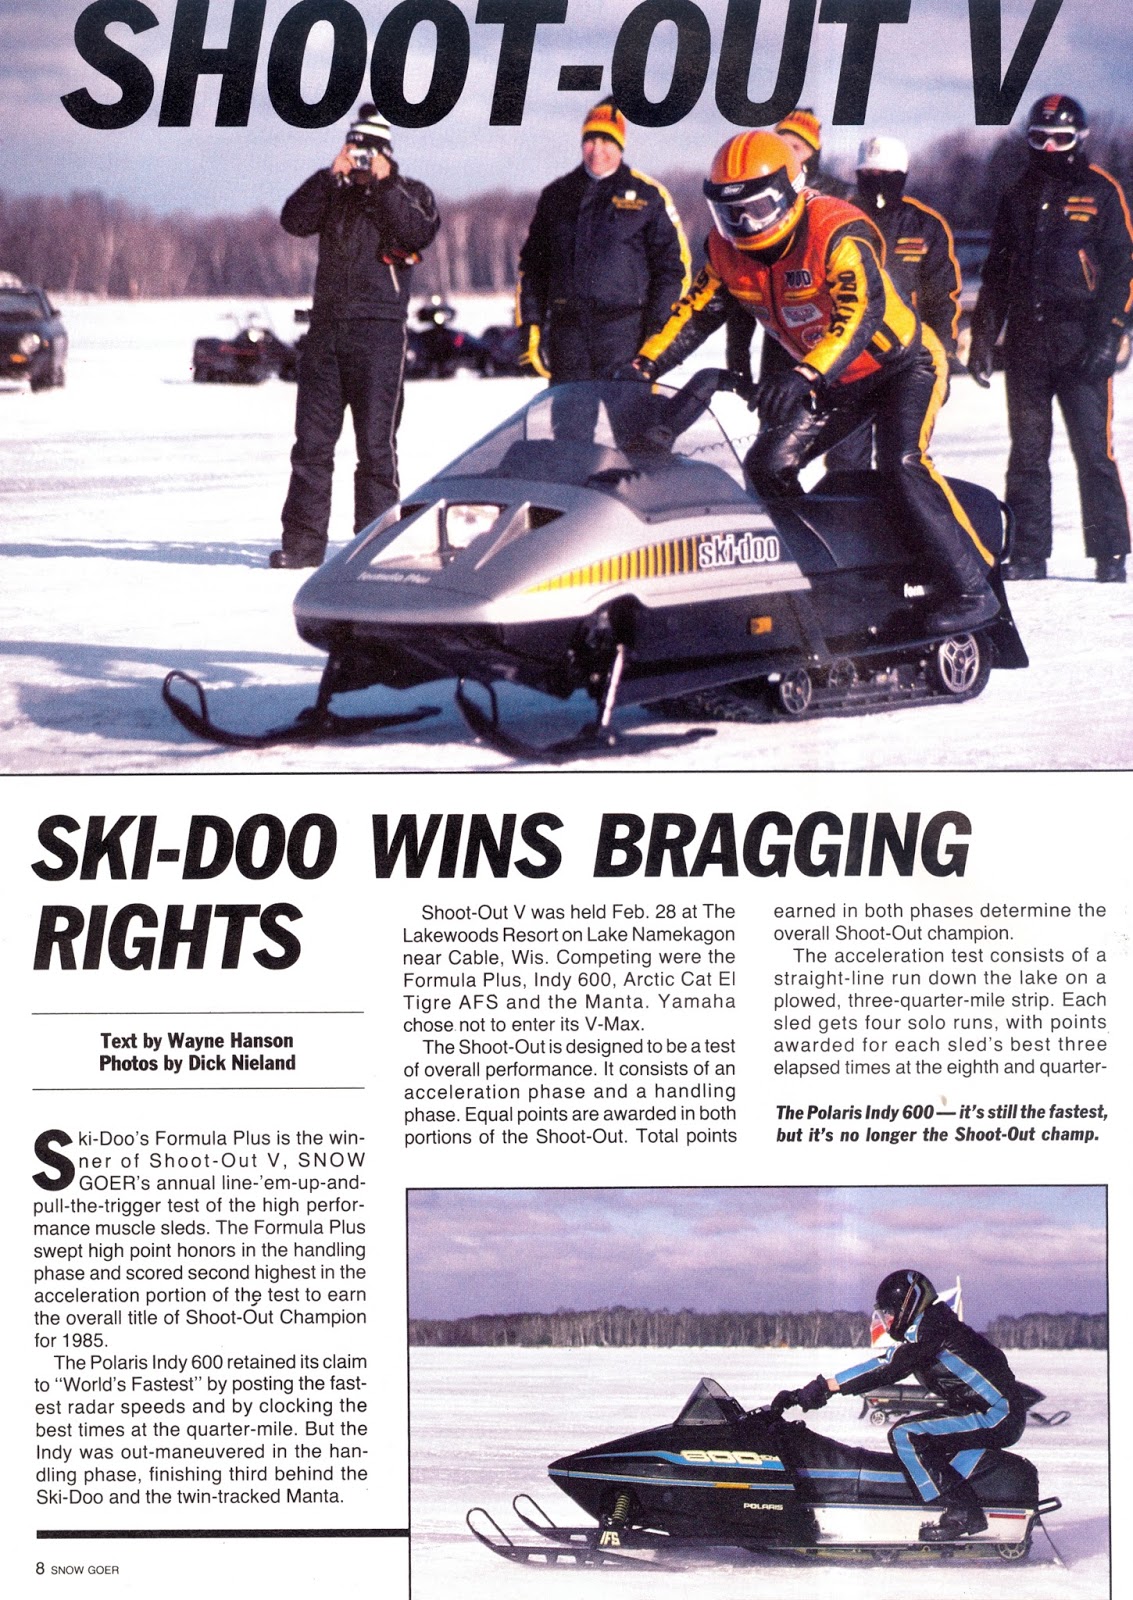 CLASSIC SNOWMOBILES OF THE 1984 - FORMULA PLUS WINS SHOOT-OUT